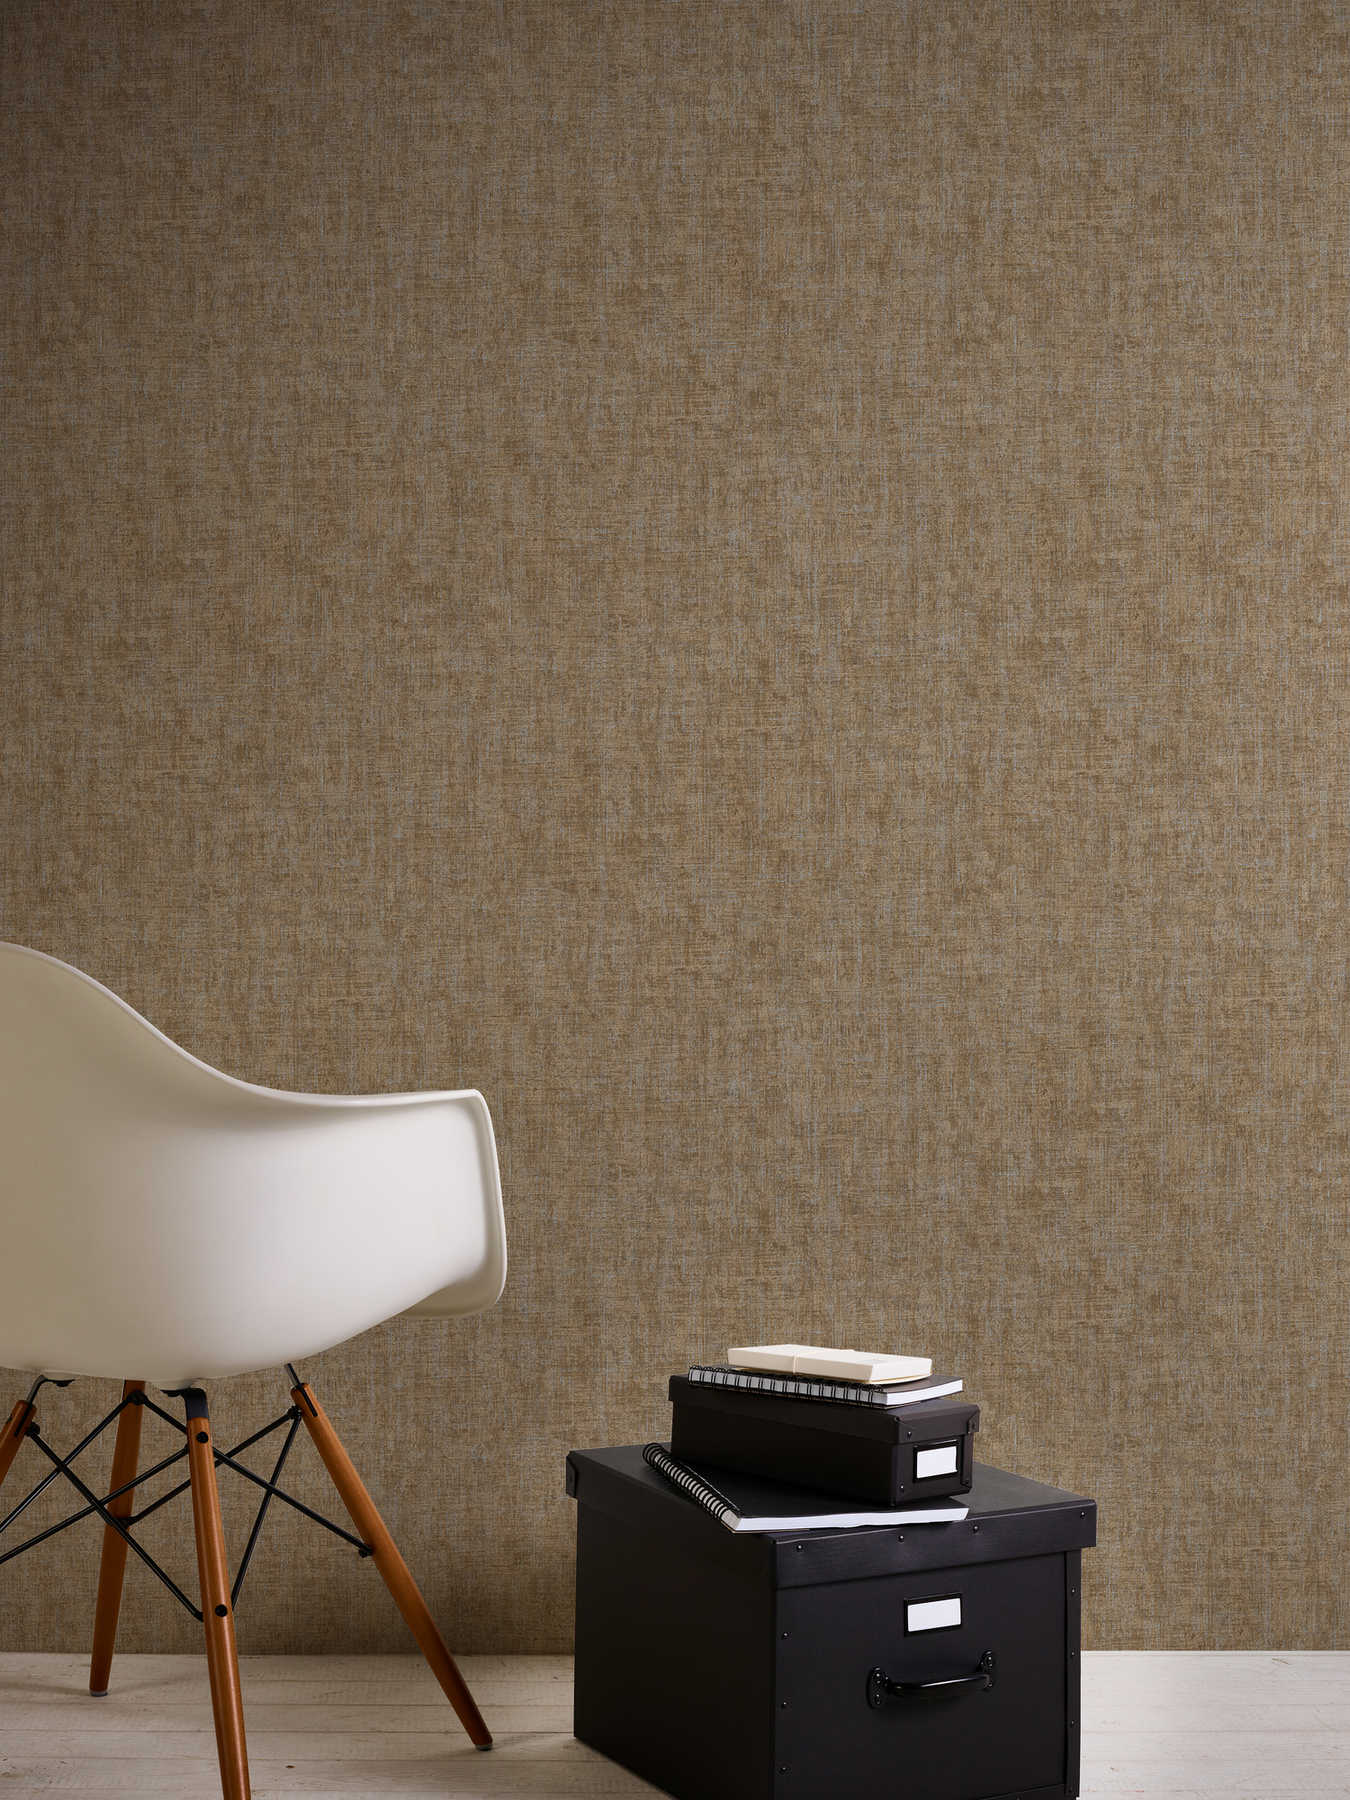             wallpaper brown mottled with silver accents & wood texture
        